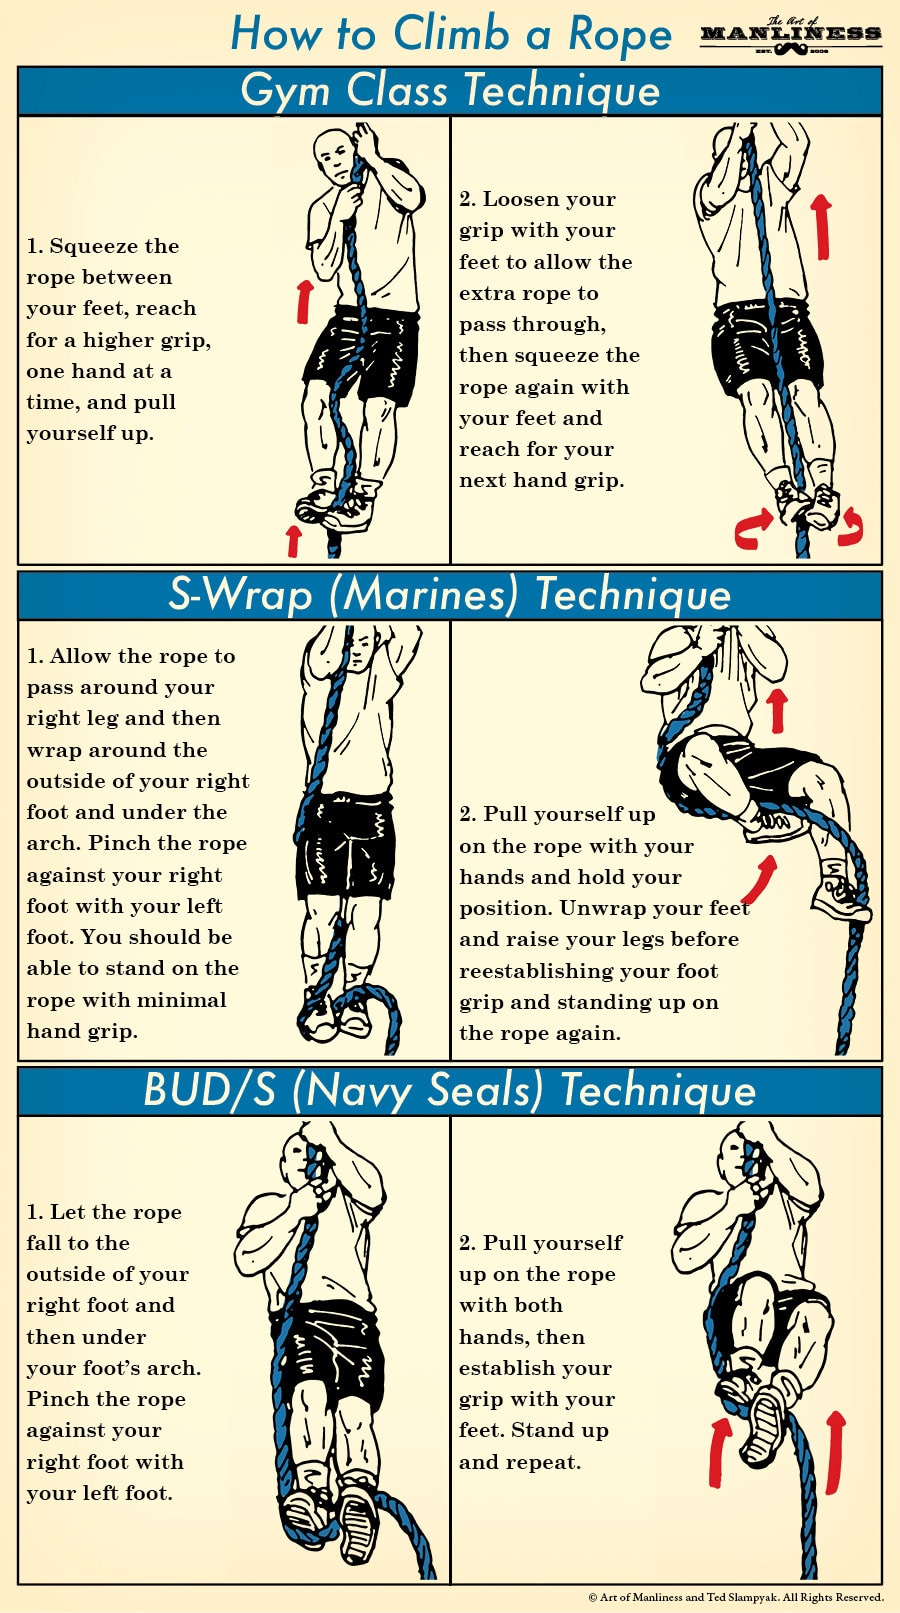 Three ways to climb a rope techniques illustration. 